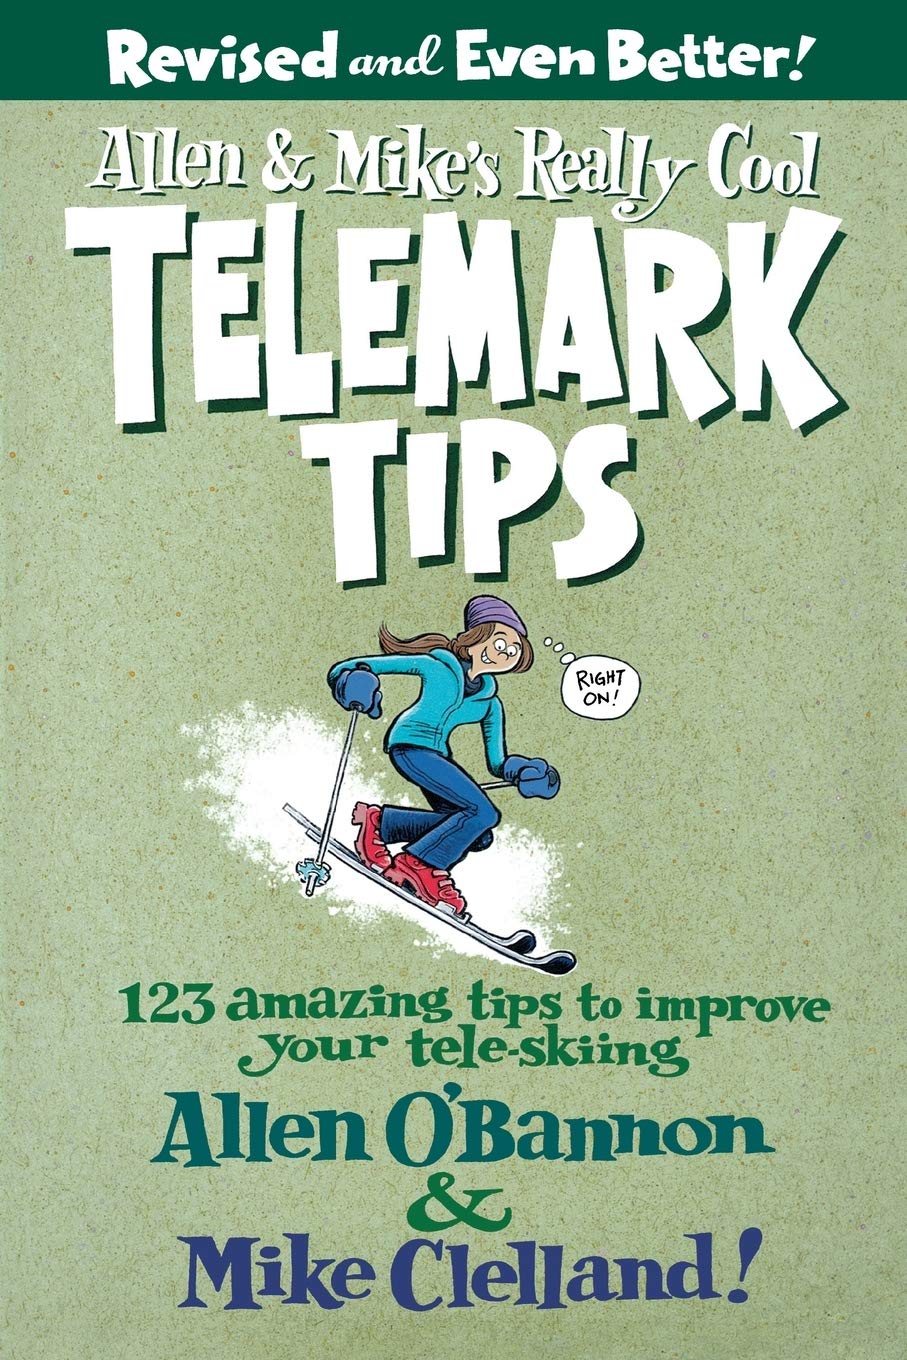 Allen & Mike's Telemark Tips 2nd Edition